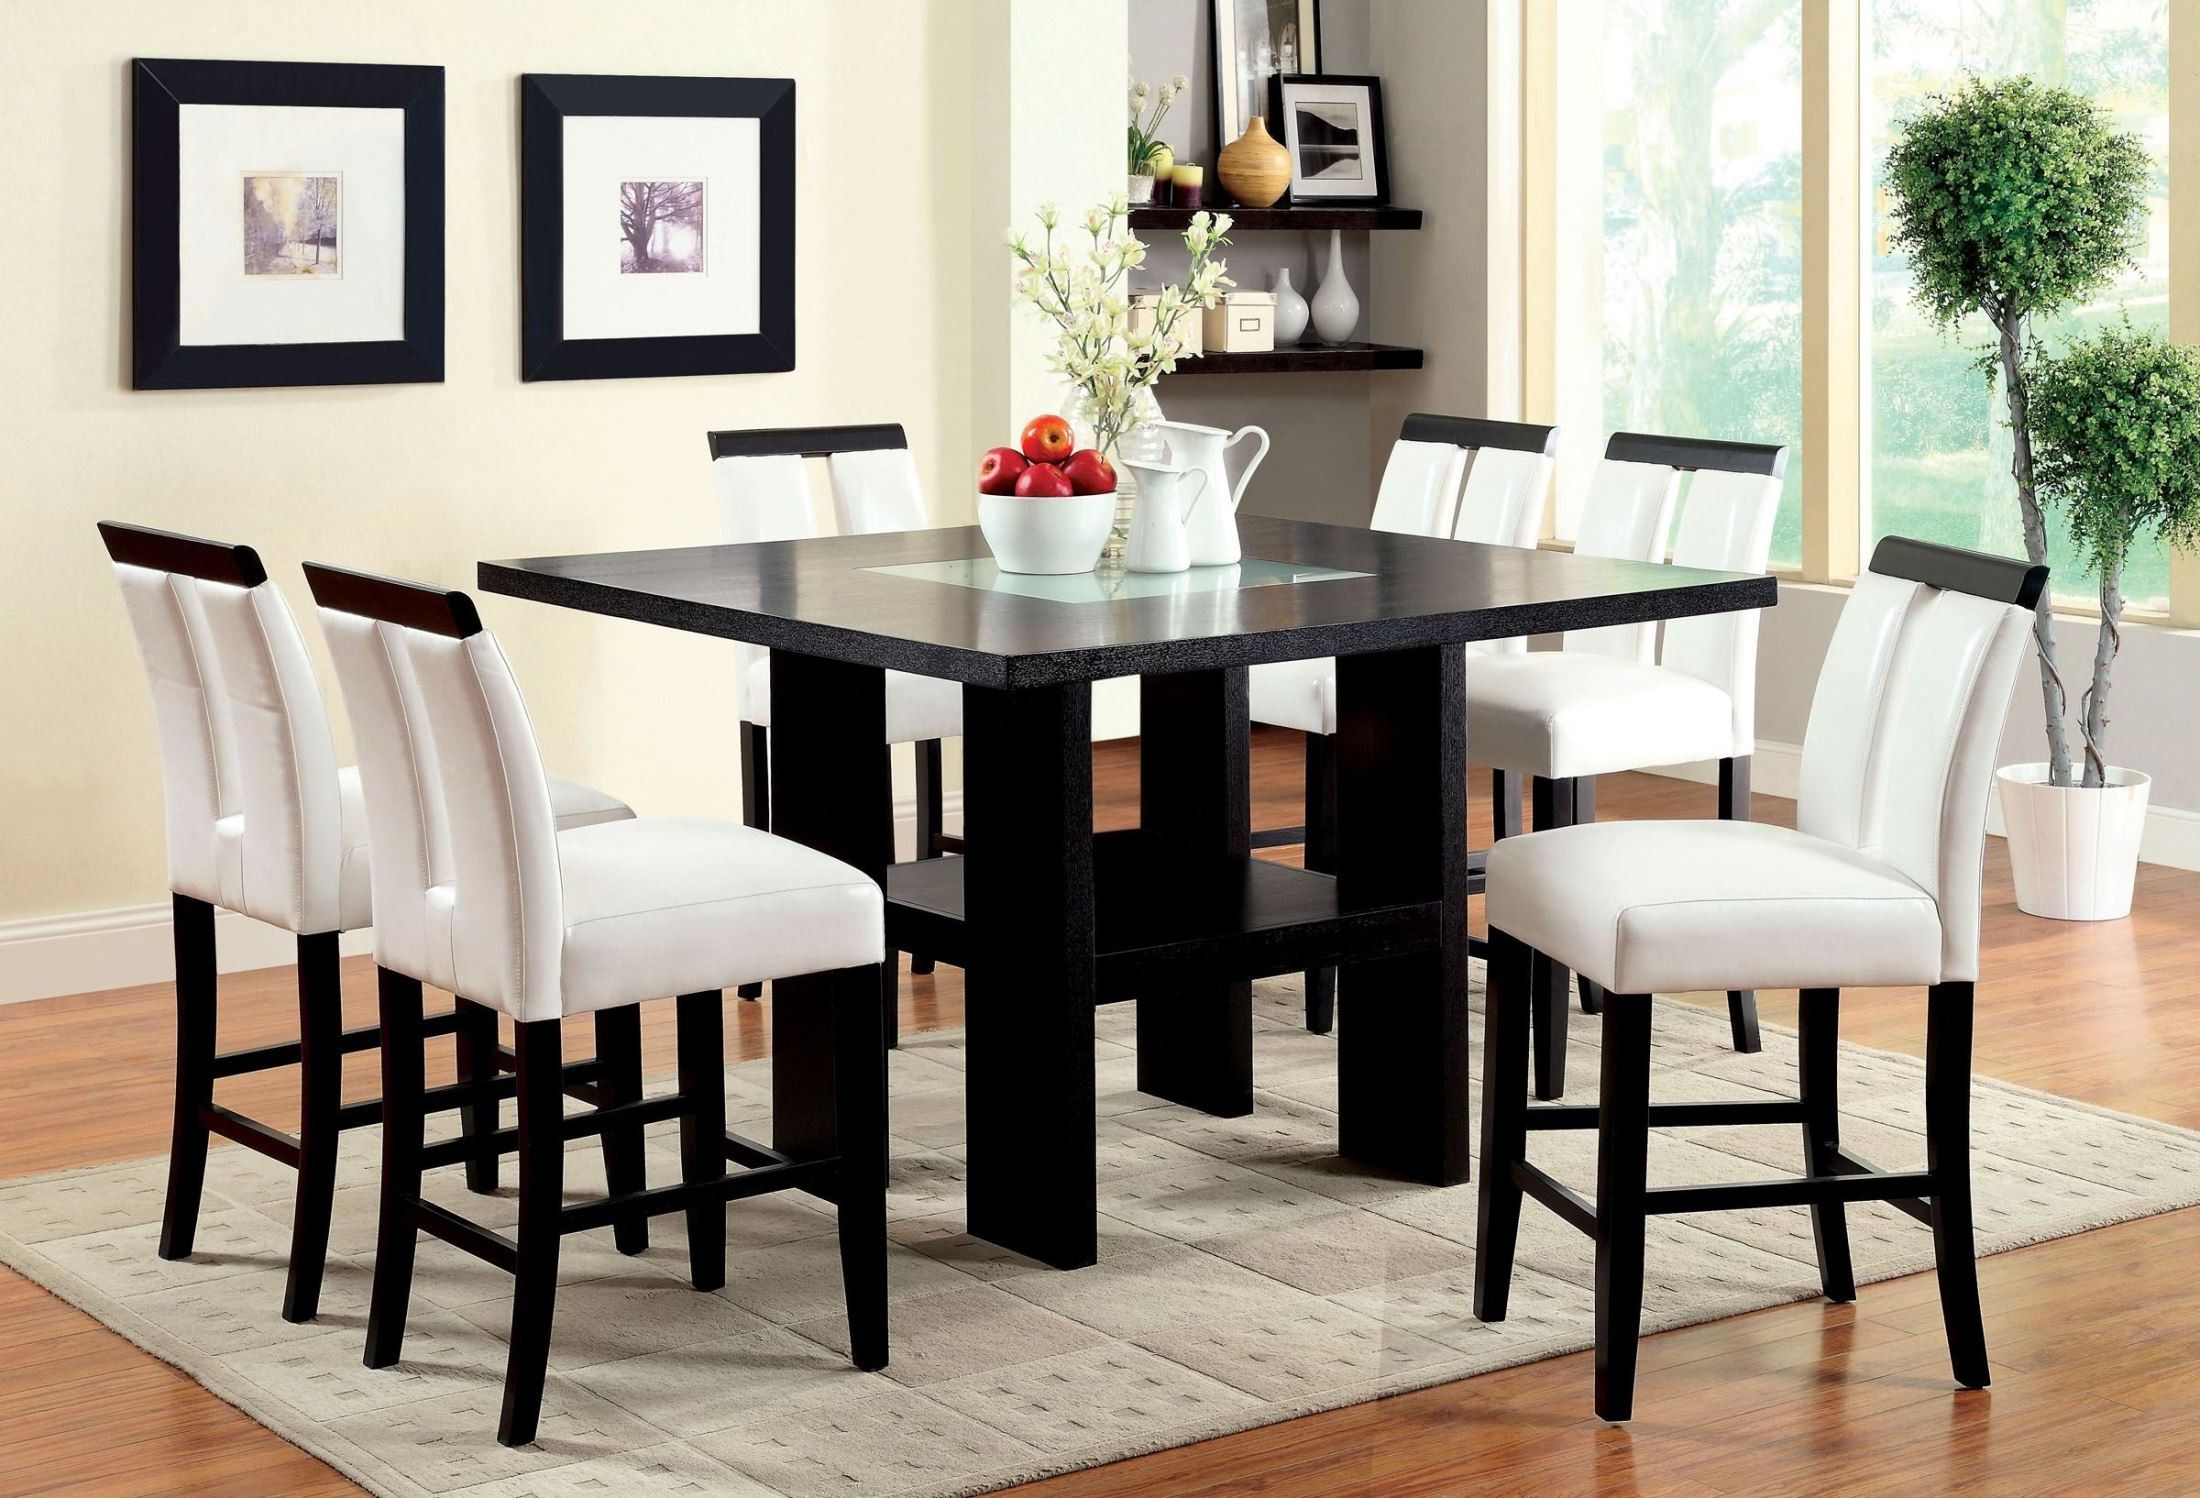 Charterville Counter Height Pedestal Dining Tables With Regard To Most Recent Luminar Ii Fog Glass Counter Height Pedestal Table From (View 9 of 20)